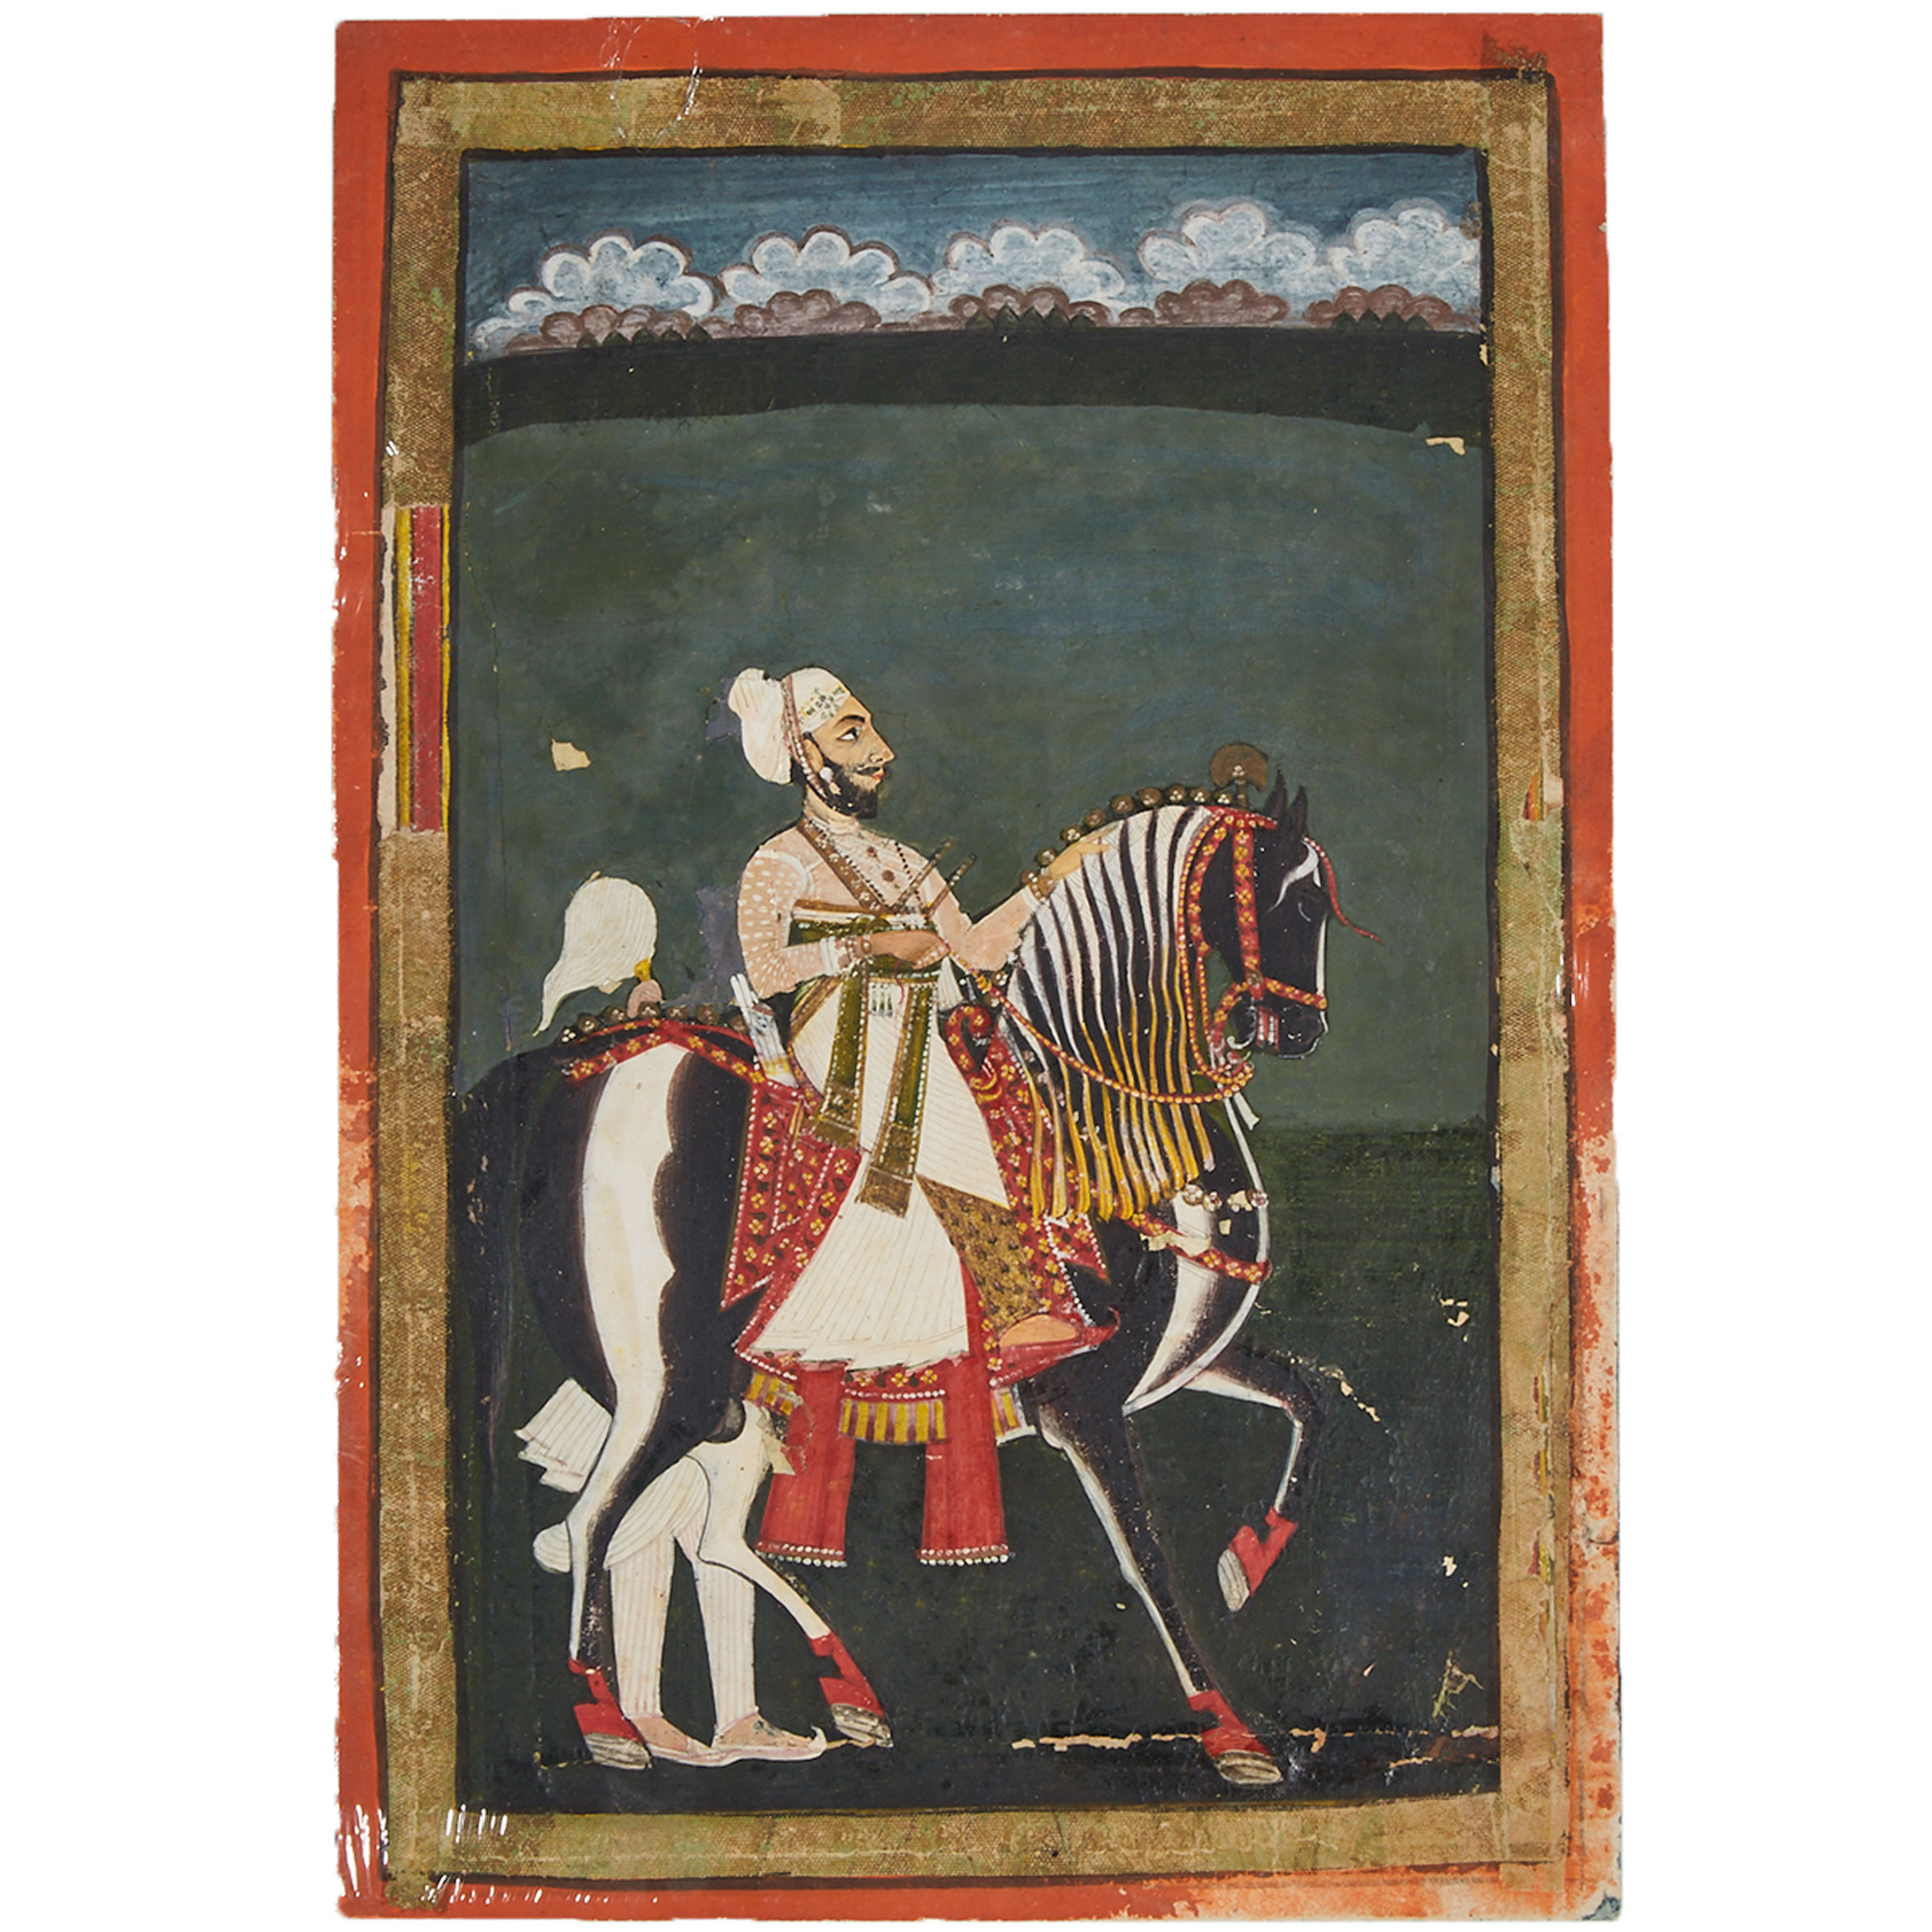 A Miniature Painting of a Prince on a Horse, Rajasthan School, 19th Century